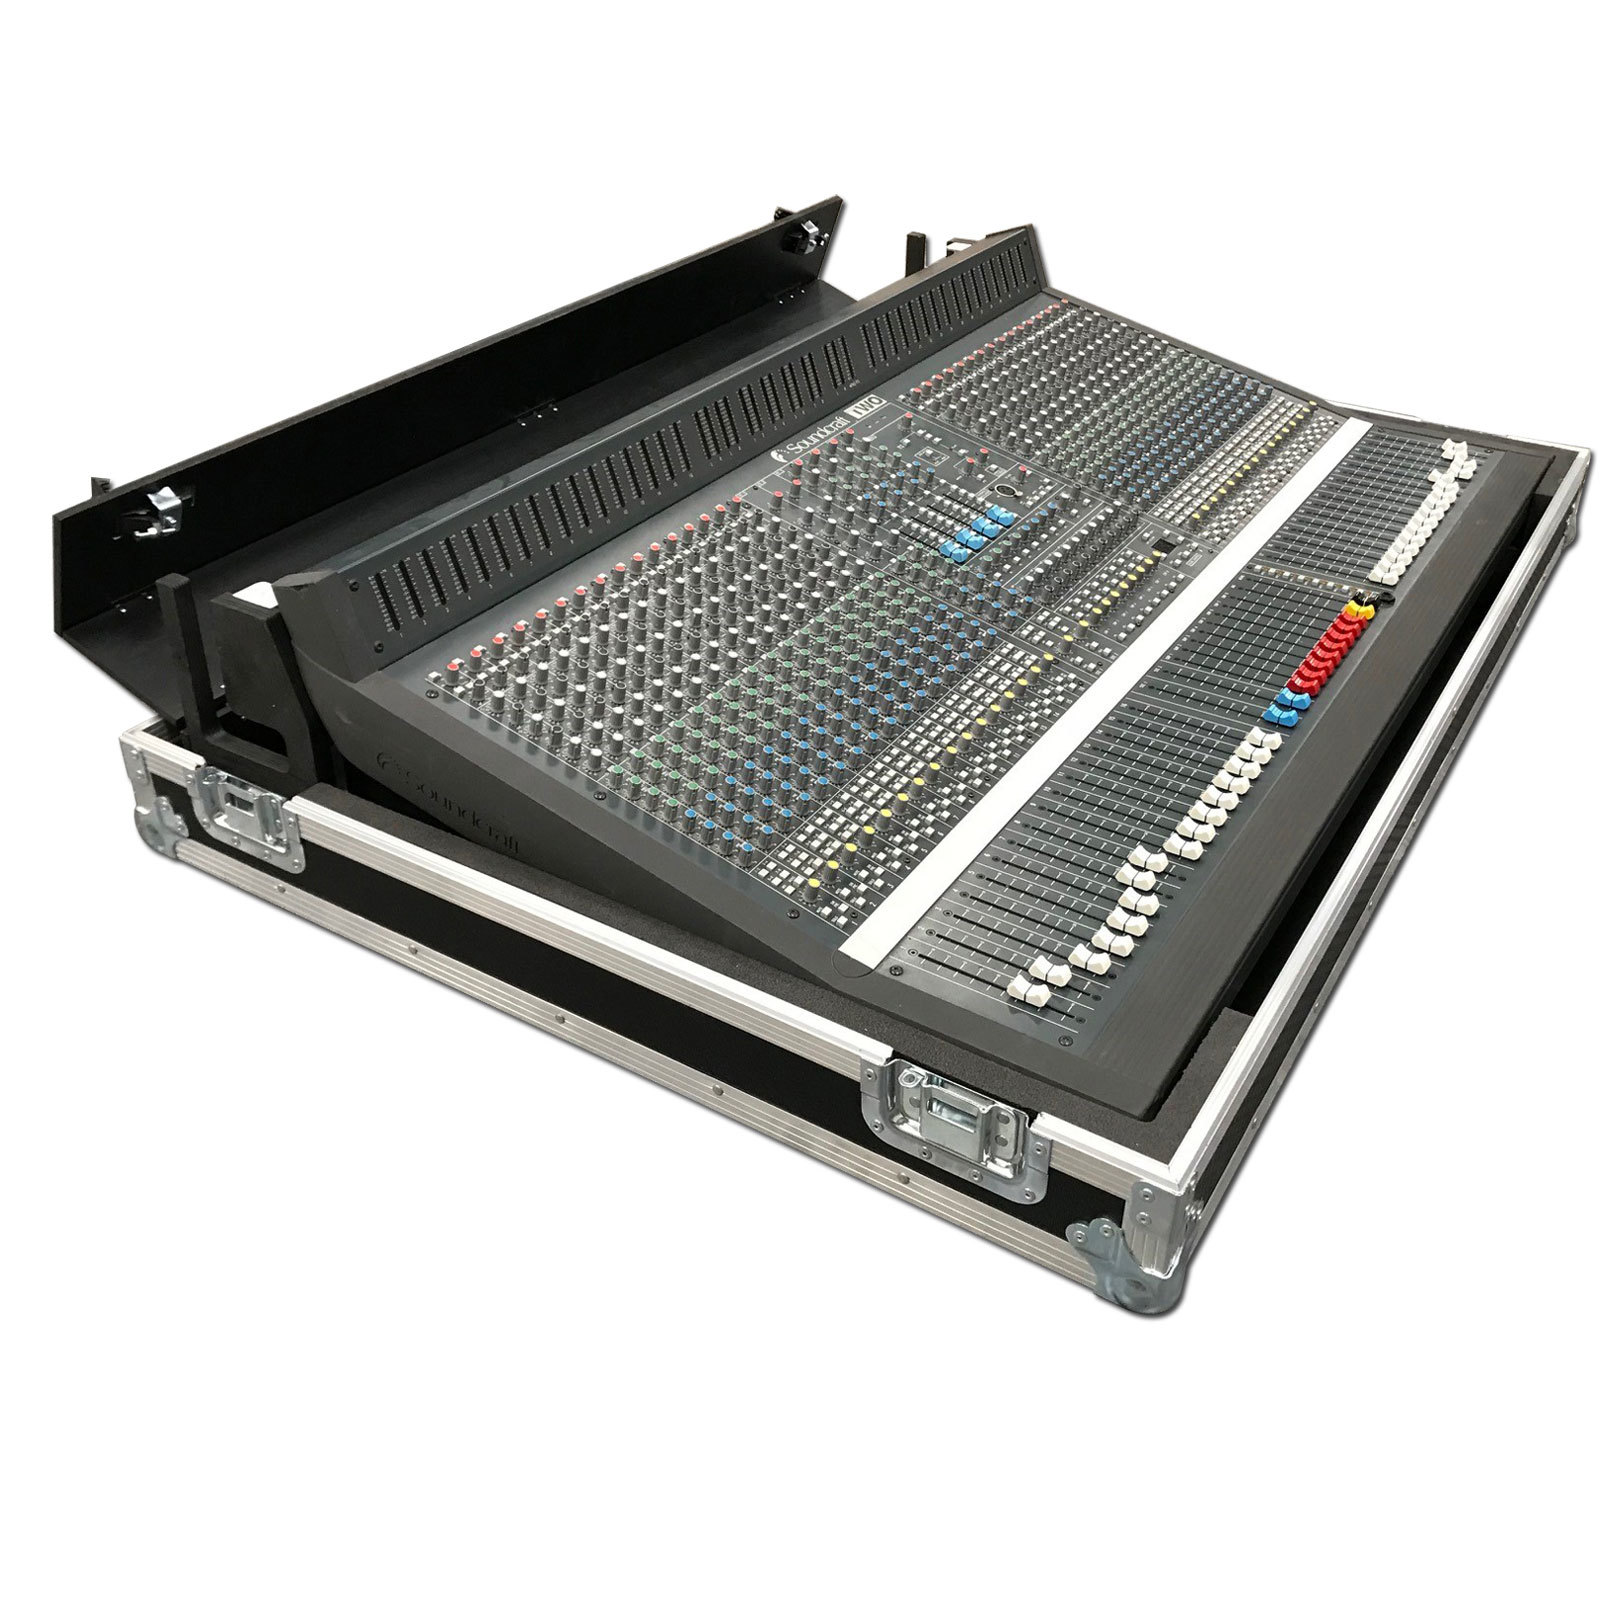 Soundcraft Series TWO Mixing Console Flightcase